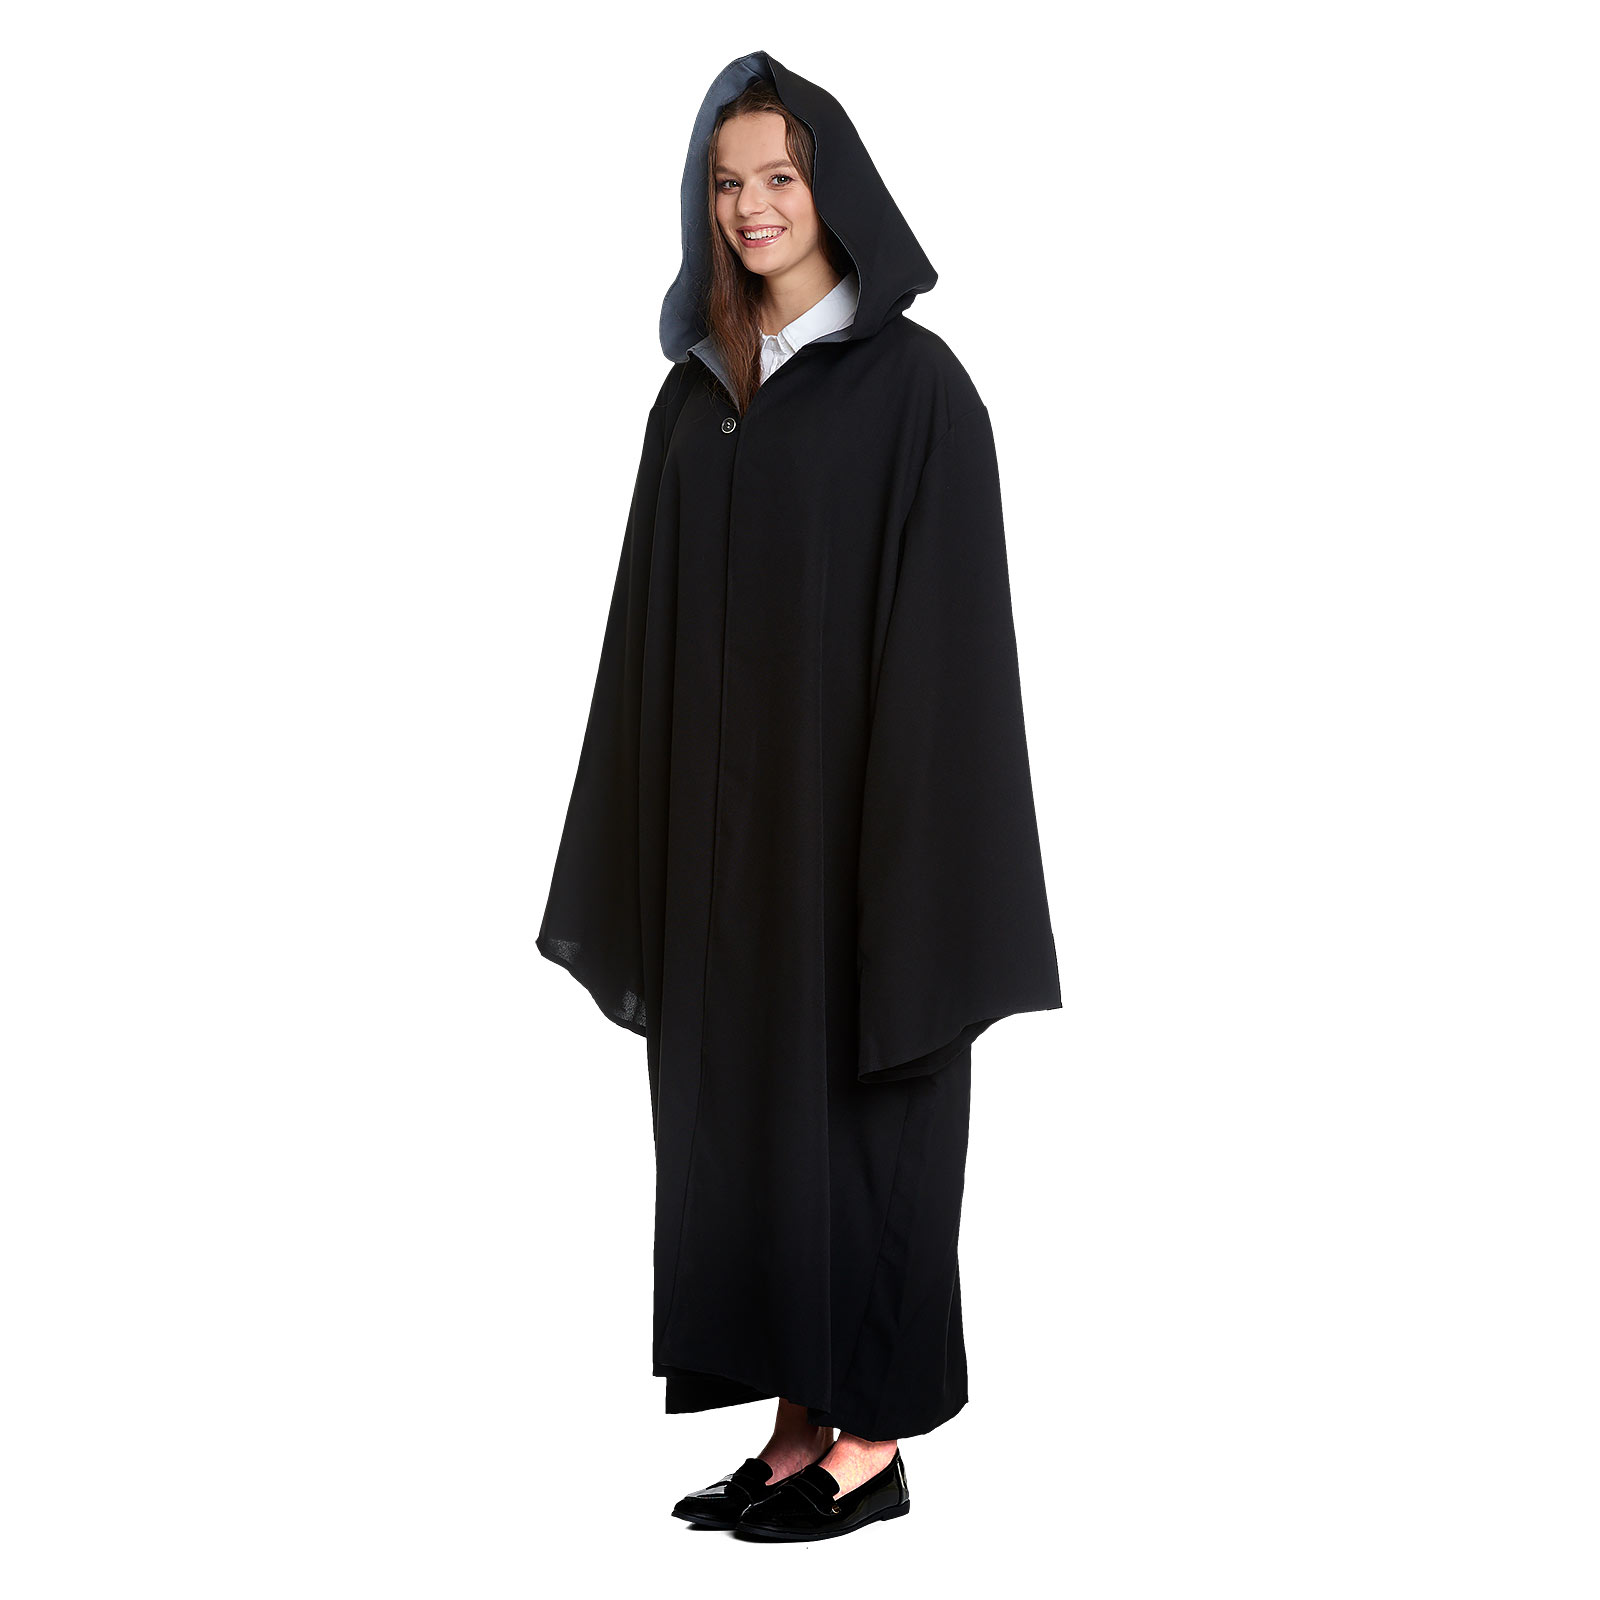 Wizard Costume Robe with Hood for Harry Potter Fans